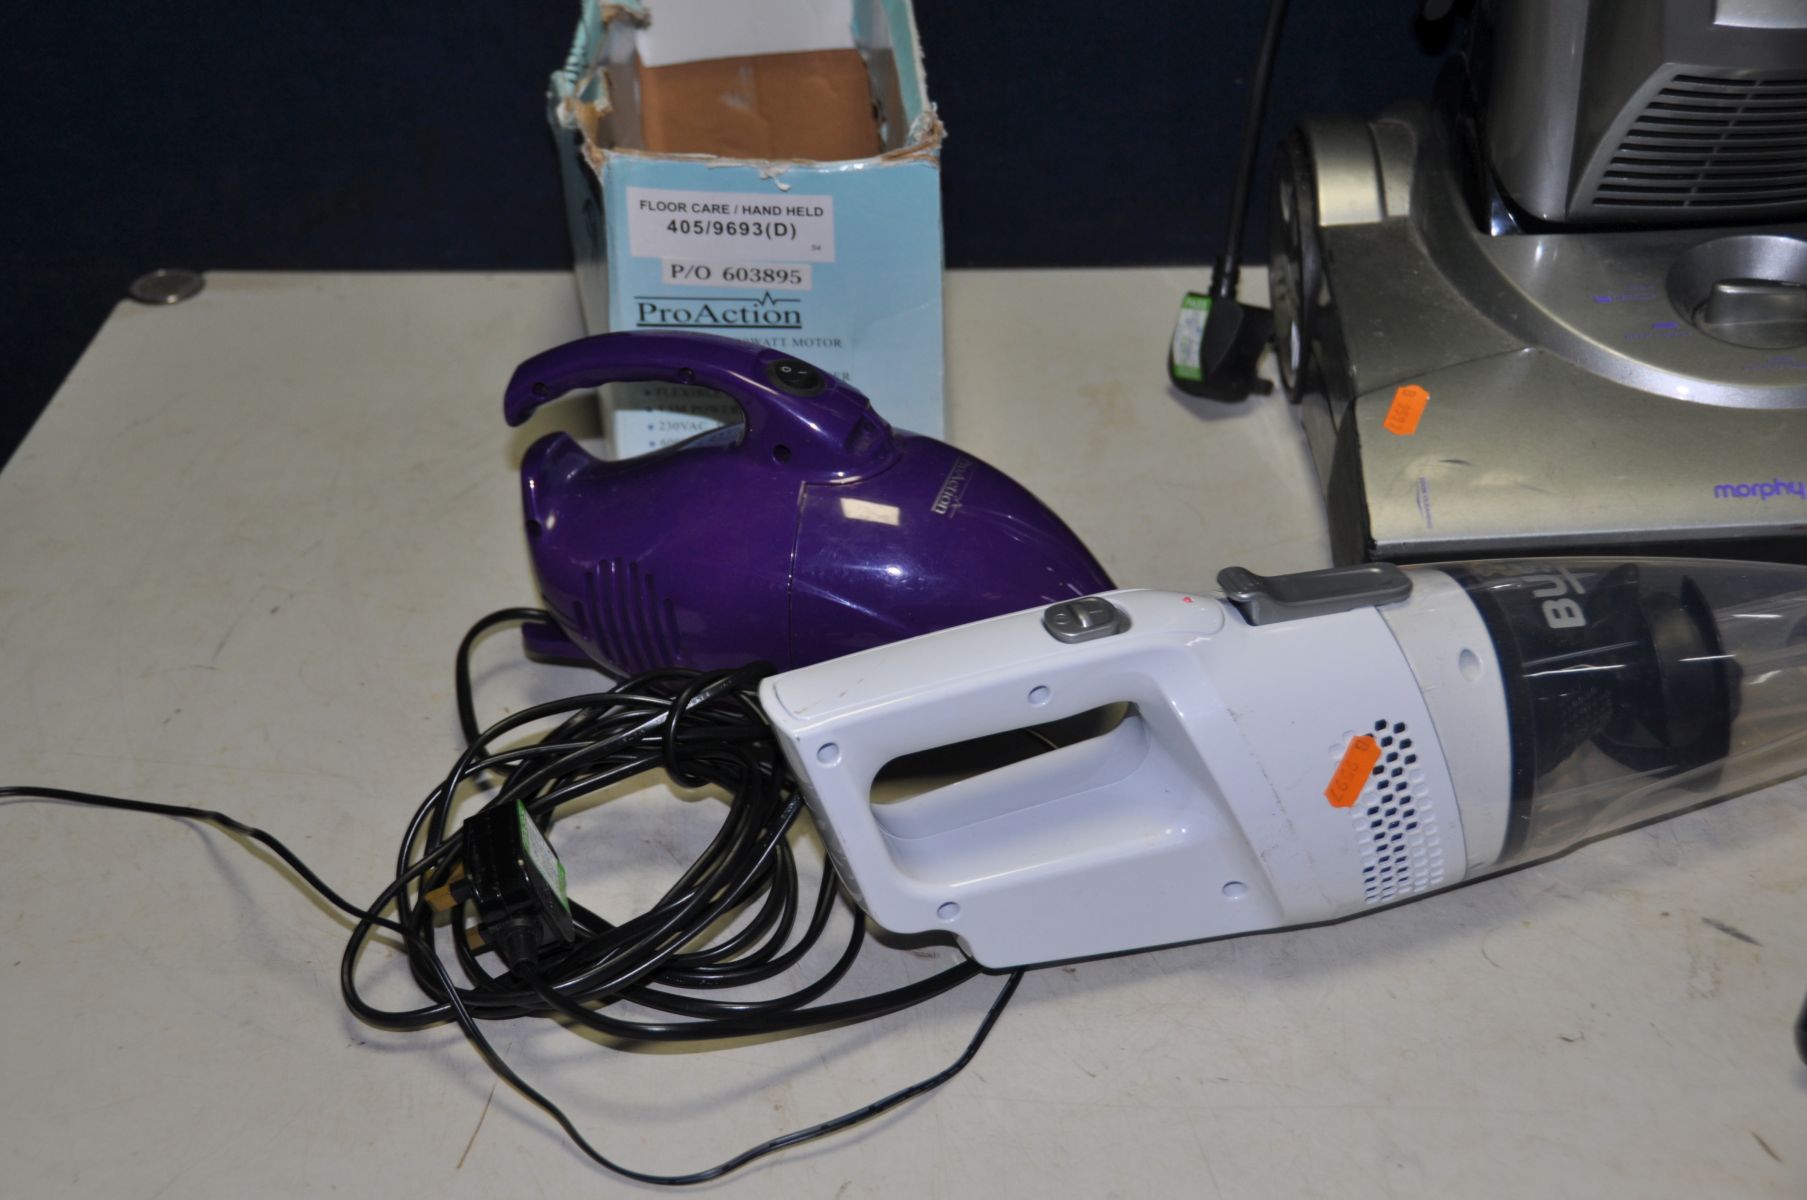 A VAX PULL ALONG VACUUM CLEANER, a Morphy Richards upright vacuum cleaner, a Pro Action hand held - Image 2 of 3